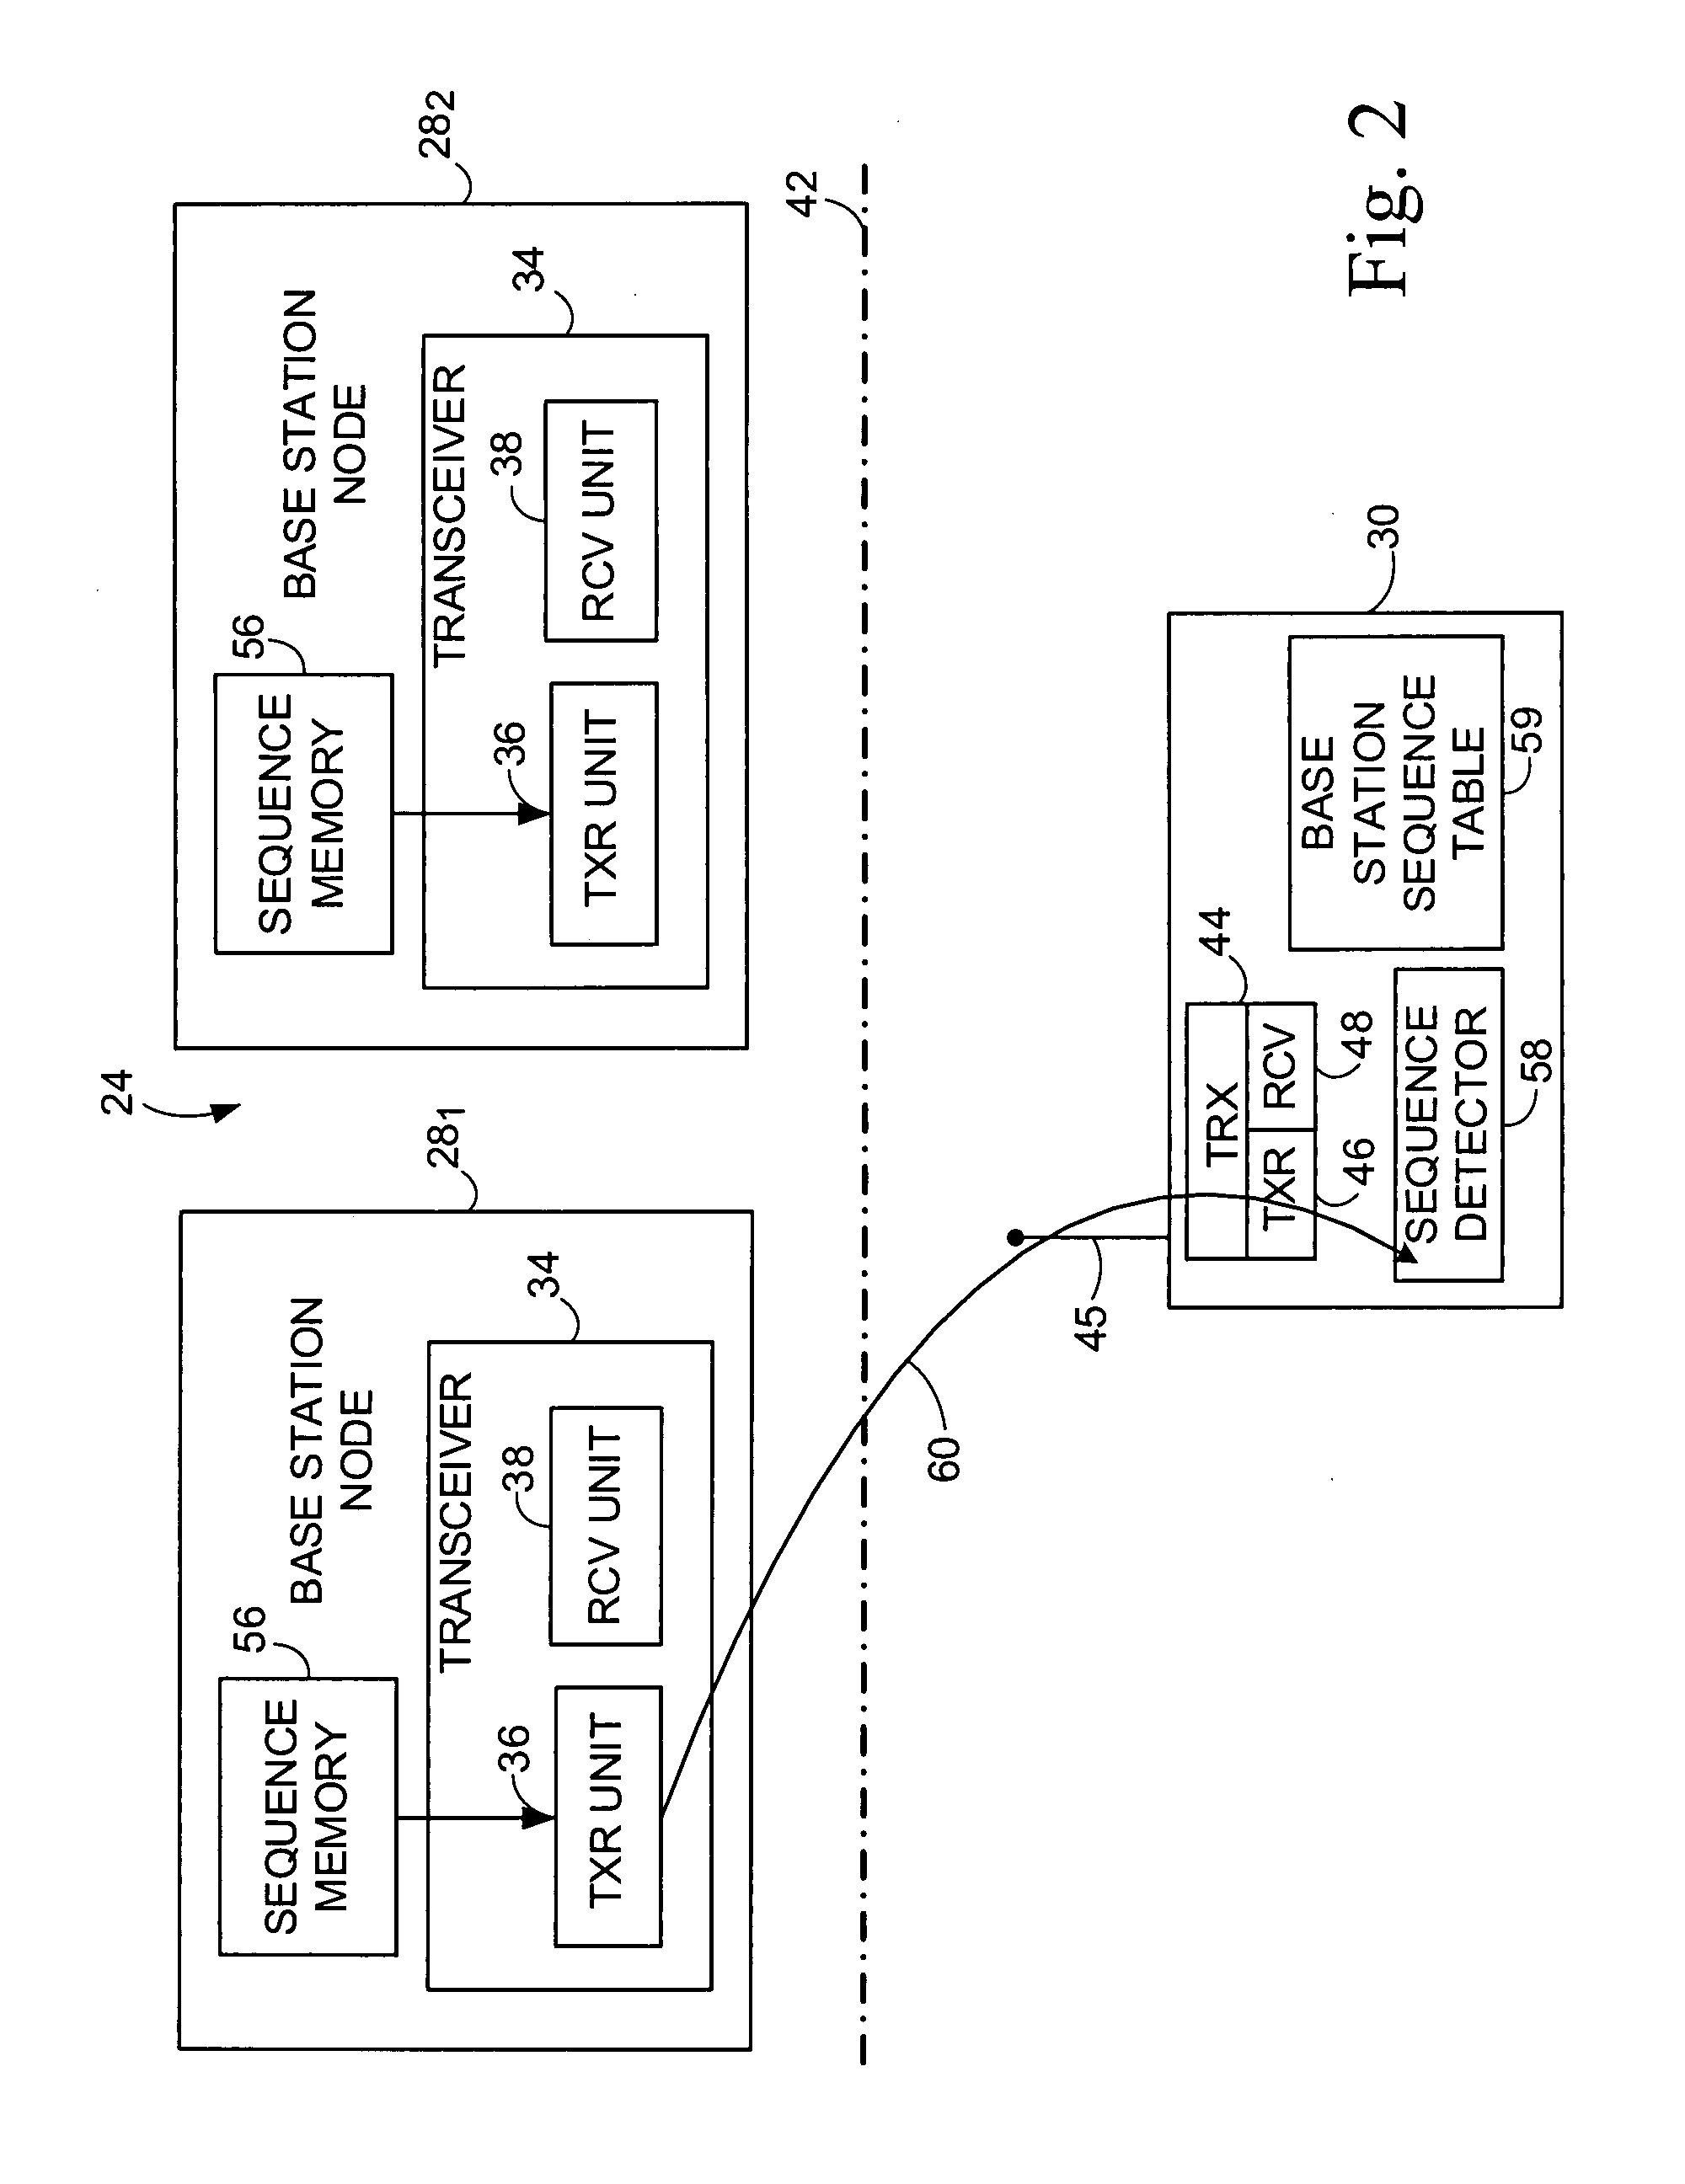 Novel signature sequences and methods for time-frequency selective channel